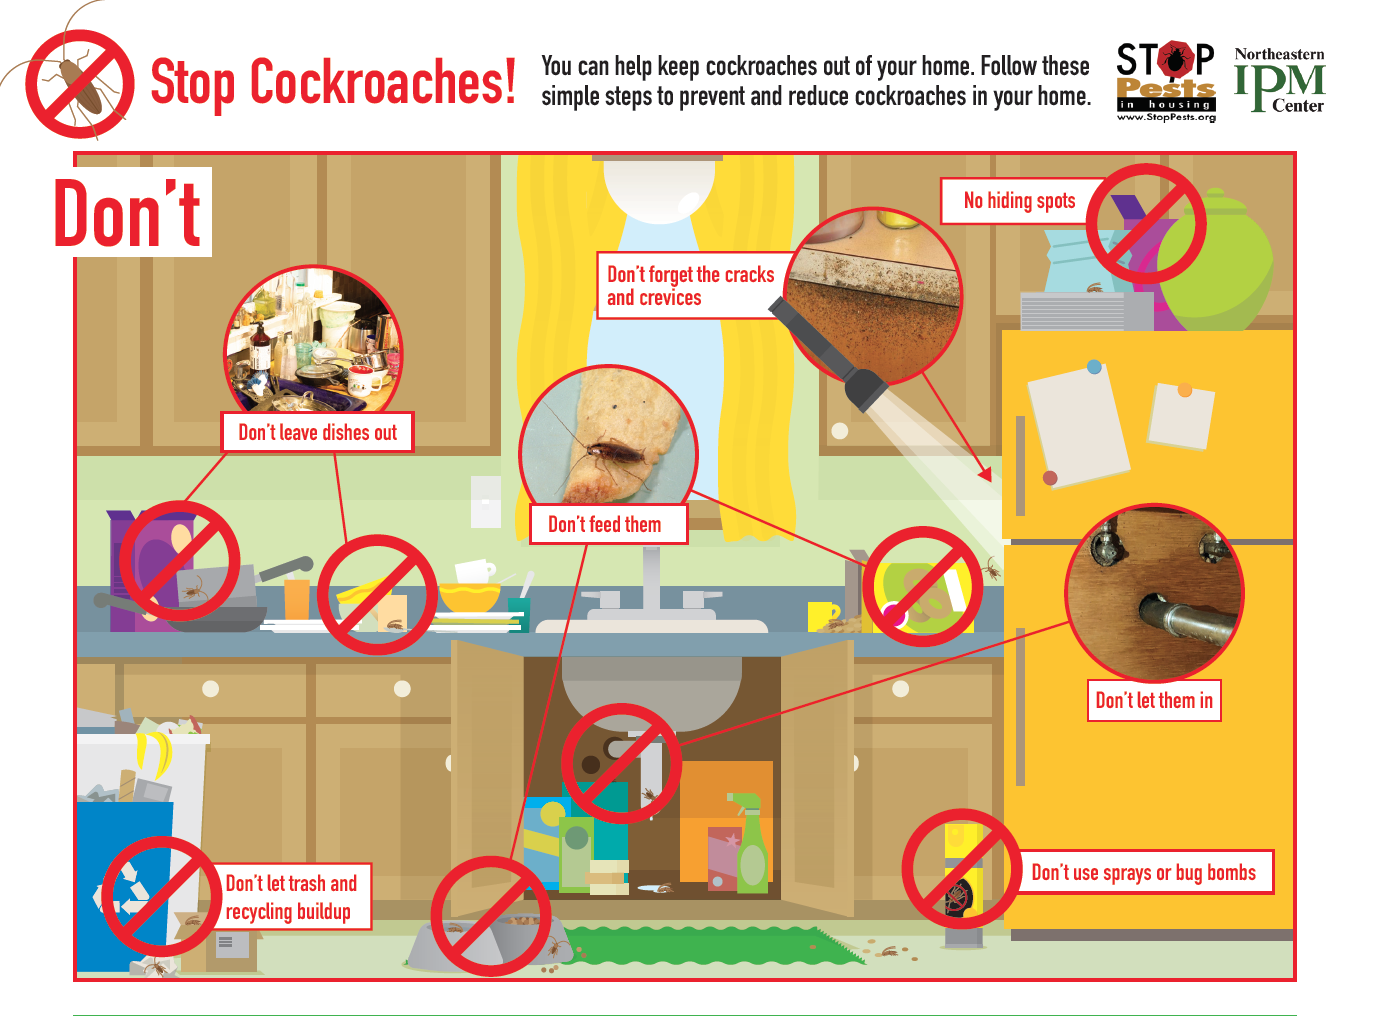 Picture-based cockroach guide for residents